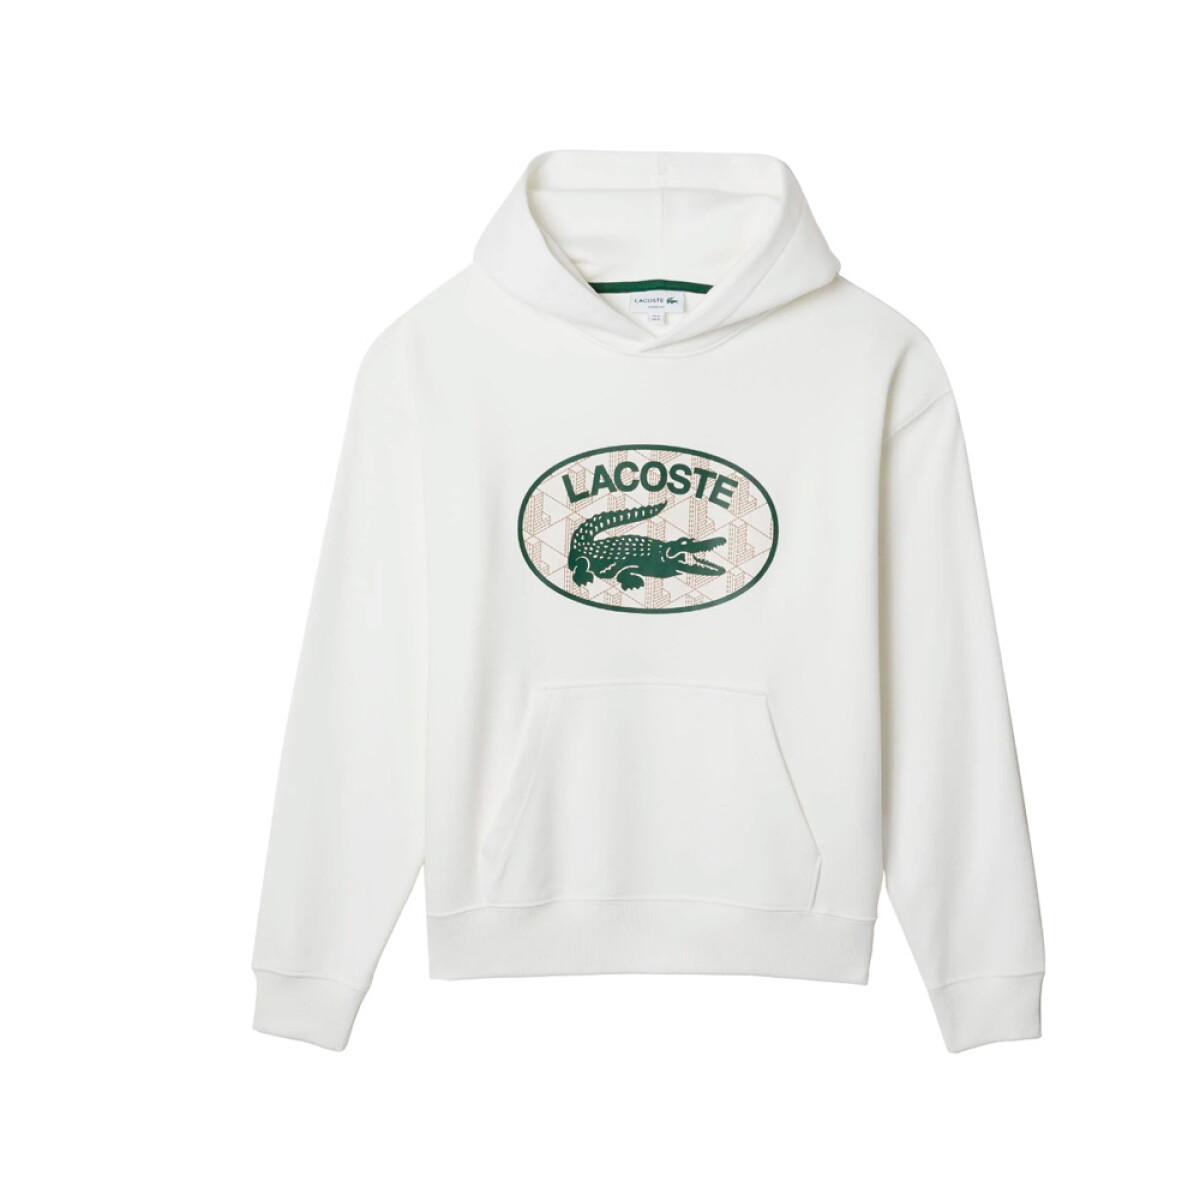 CANGURO LACOSTE LOOSE FIT BRANDED MONOGRAM - 70V 